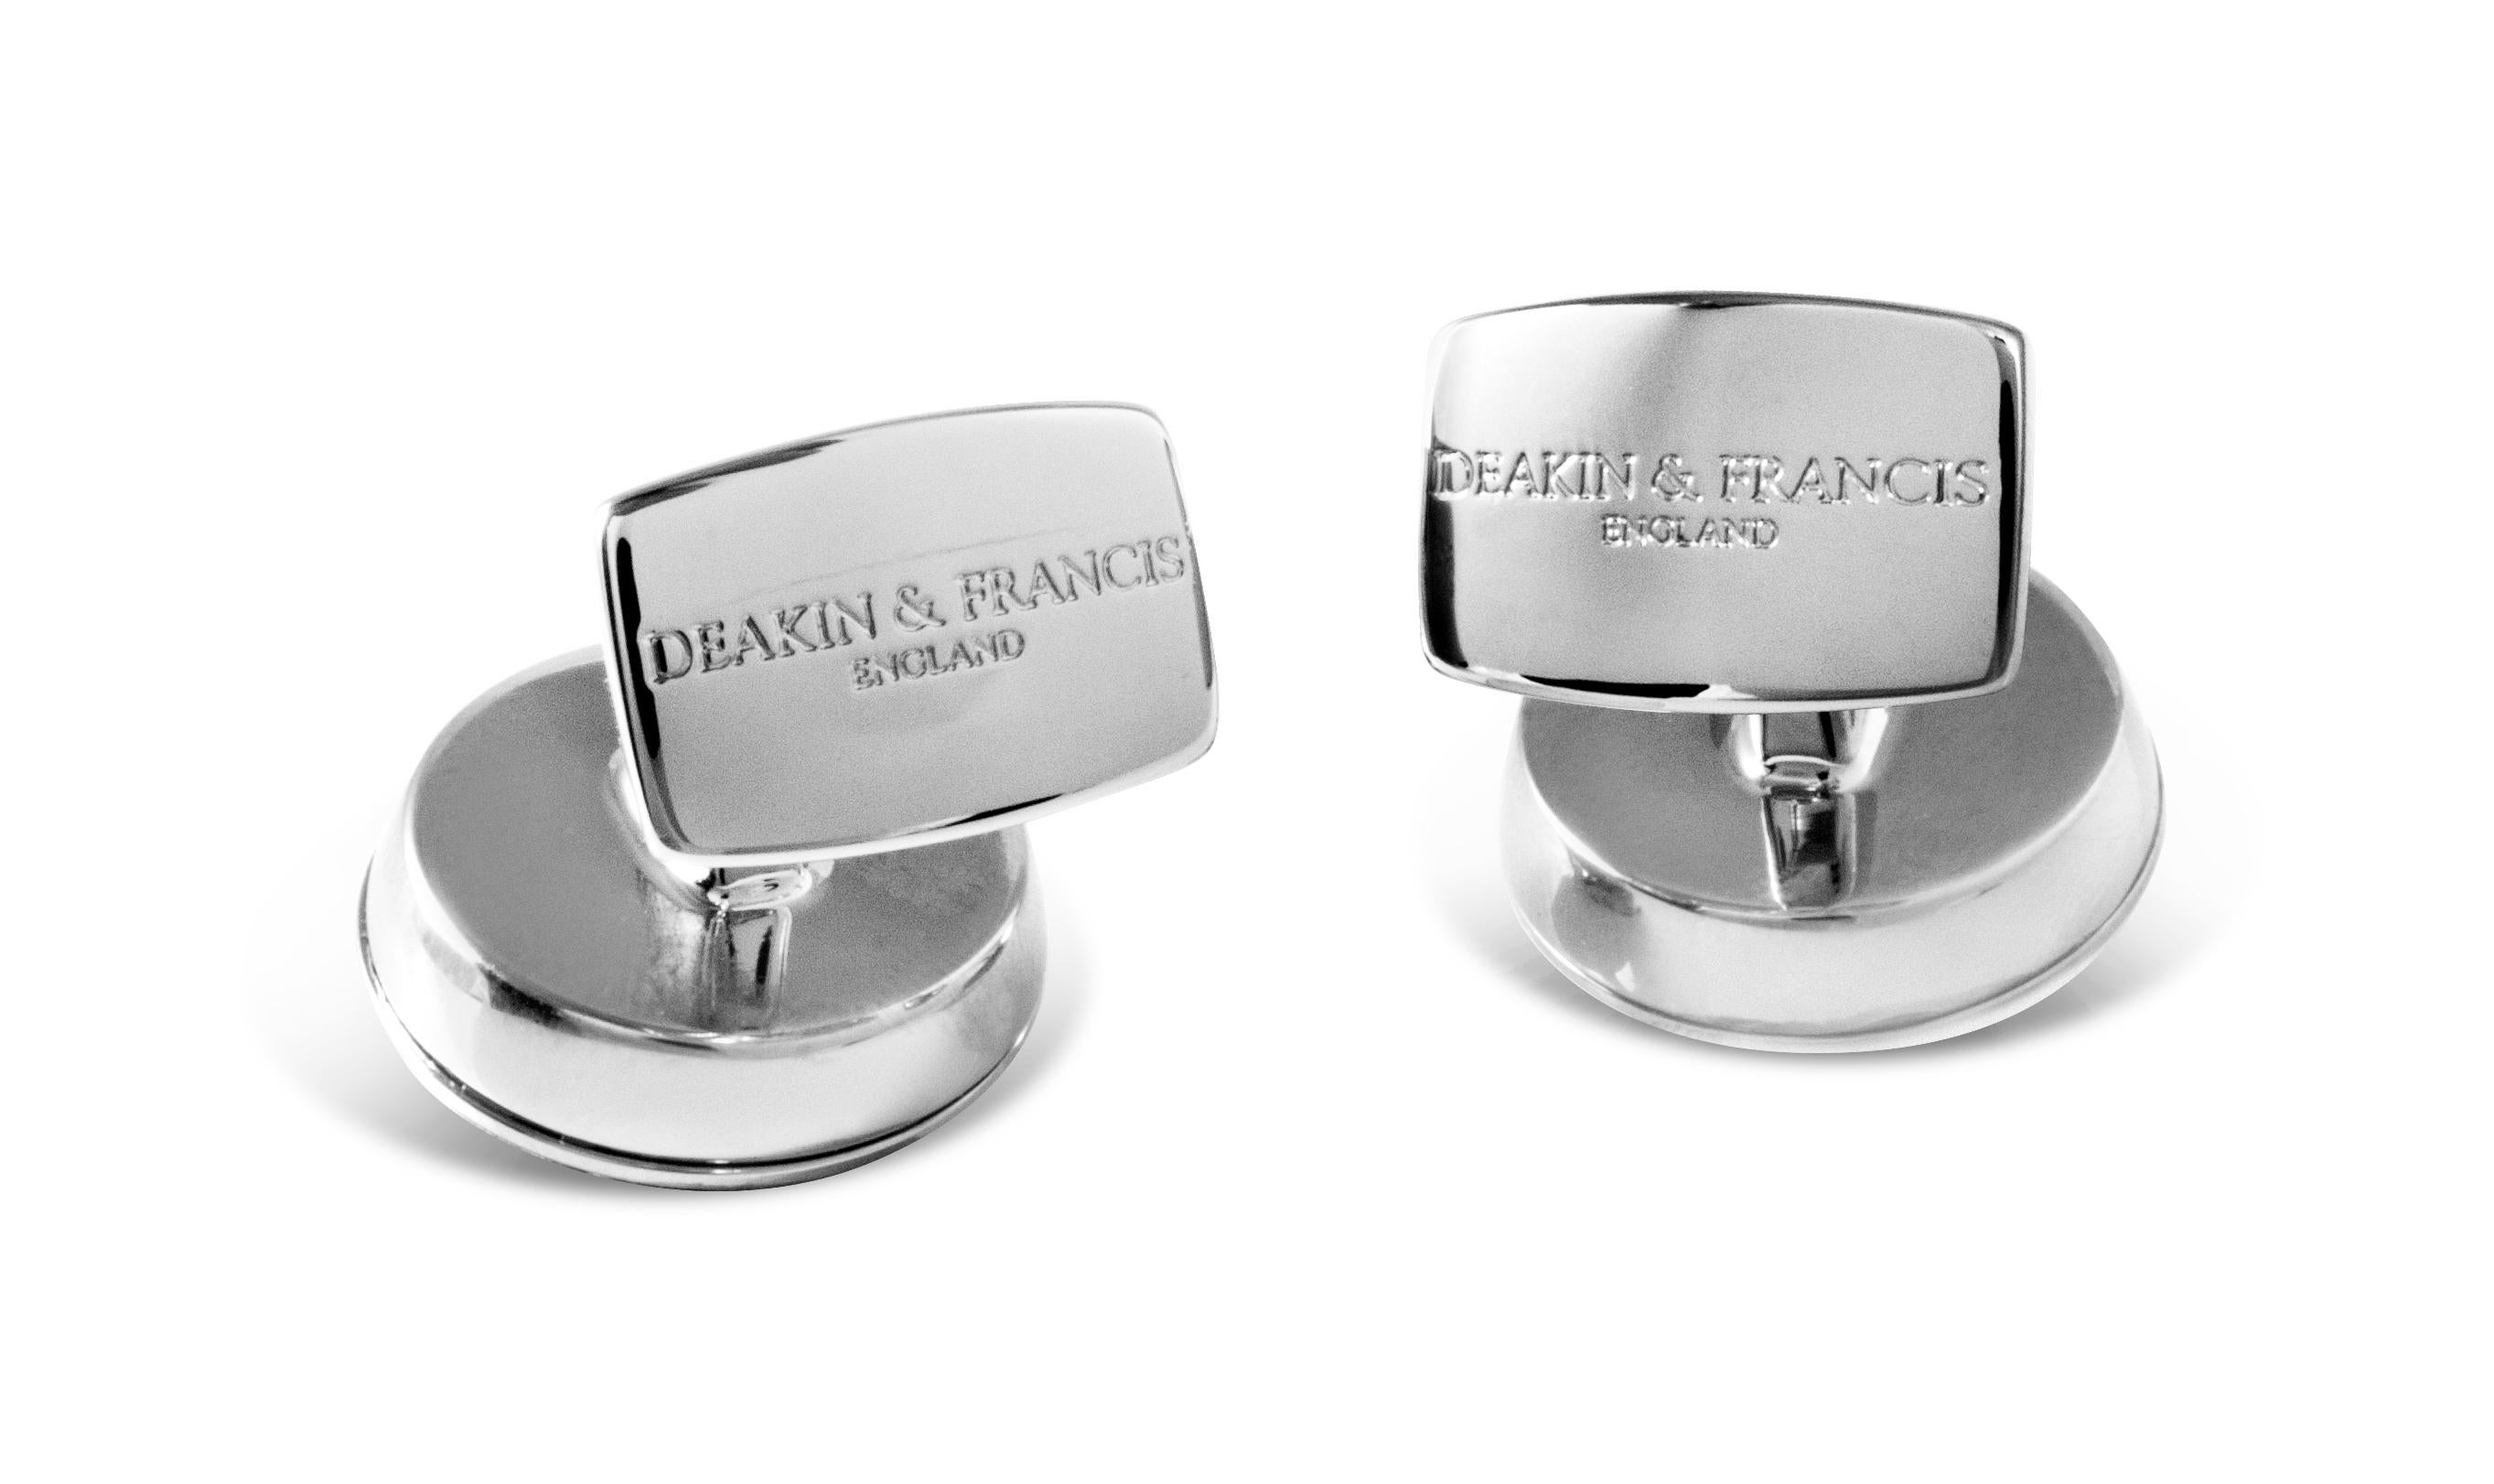 DEAKIN & FRANCIS, Piccadilly Arcade, London

Fashionably retro, the hexagonal shape and reed and ribbon border of these detailed white rhodium plated cufflinks is perfect if you are looking for a sophisticated look with a touch of vintage. 

